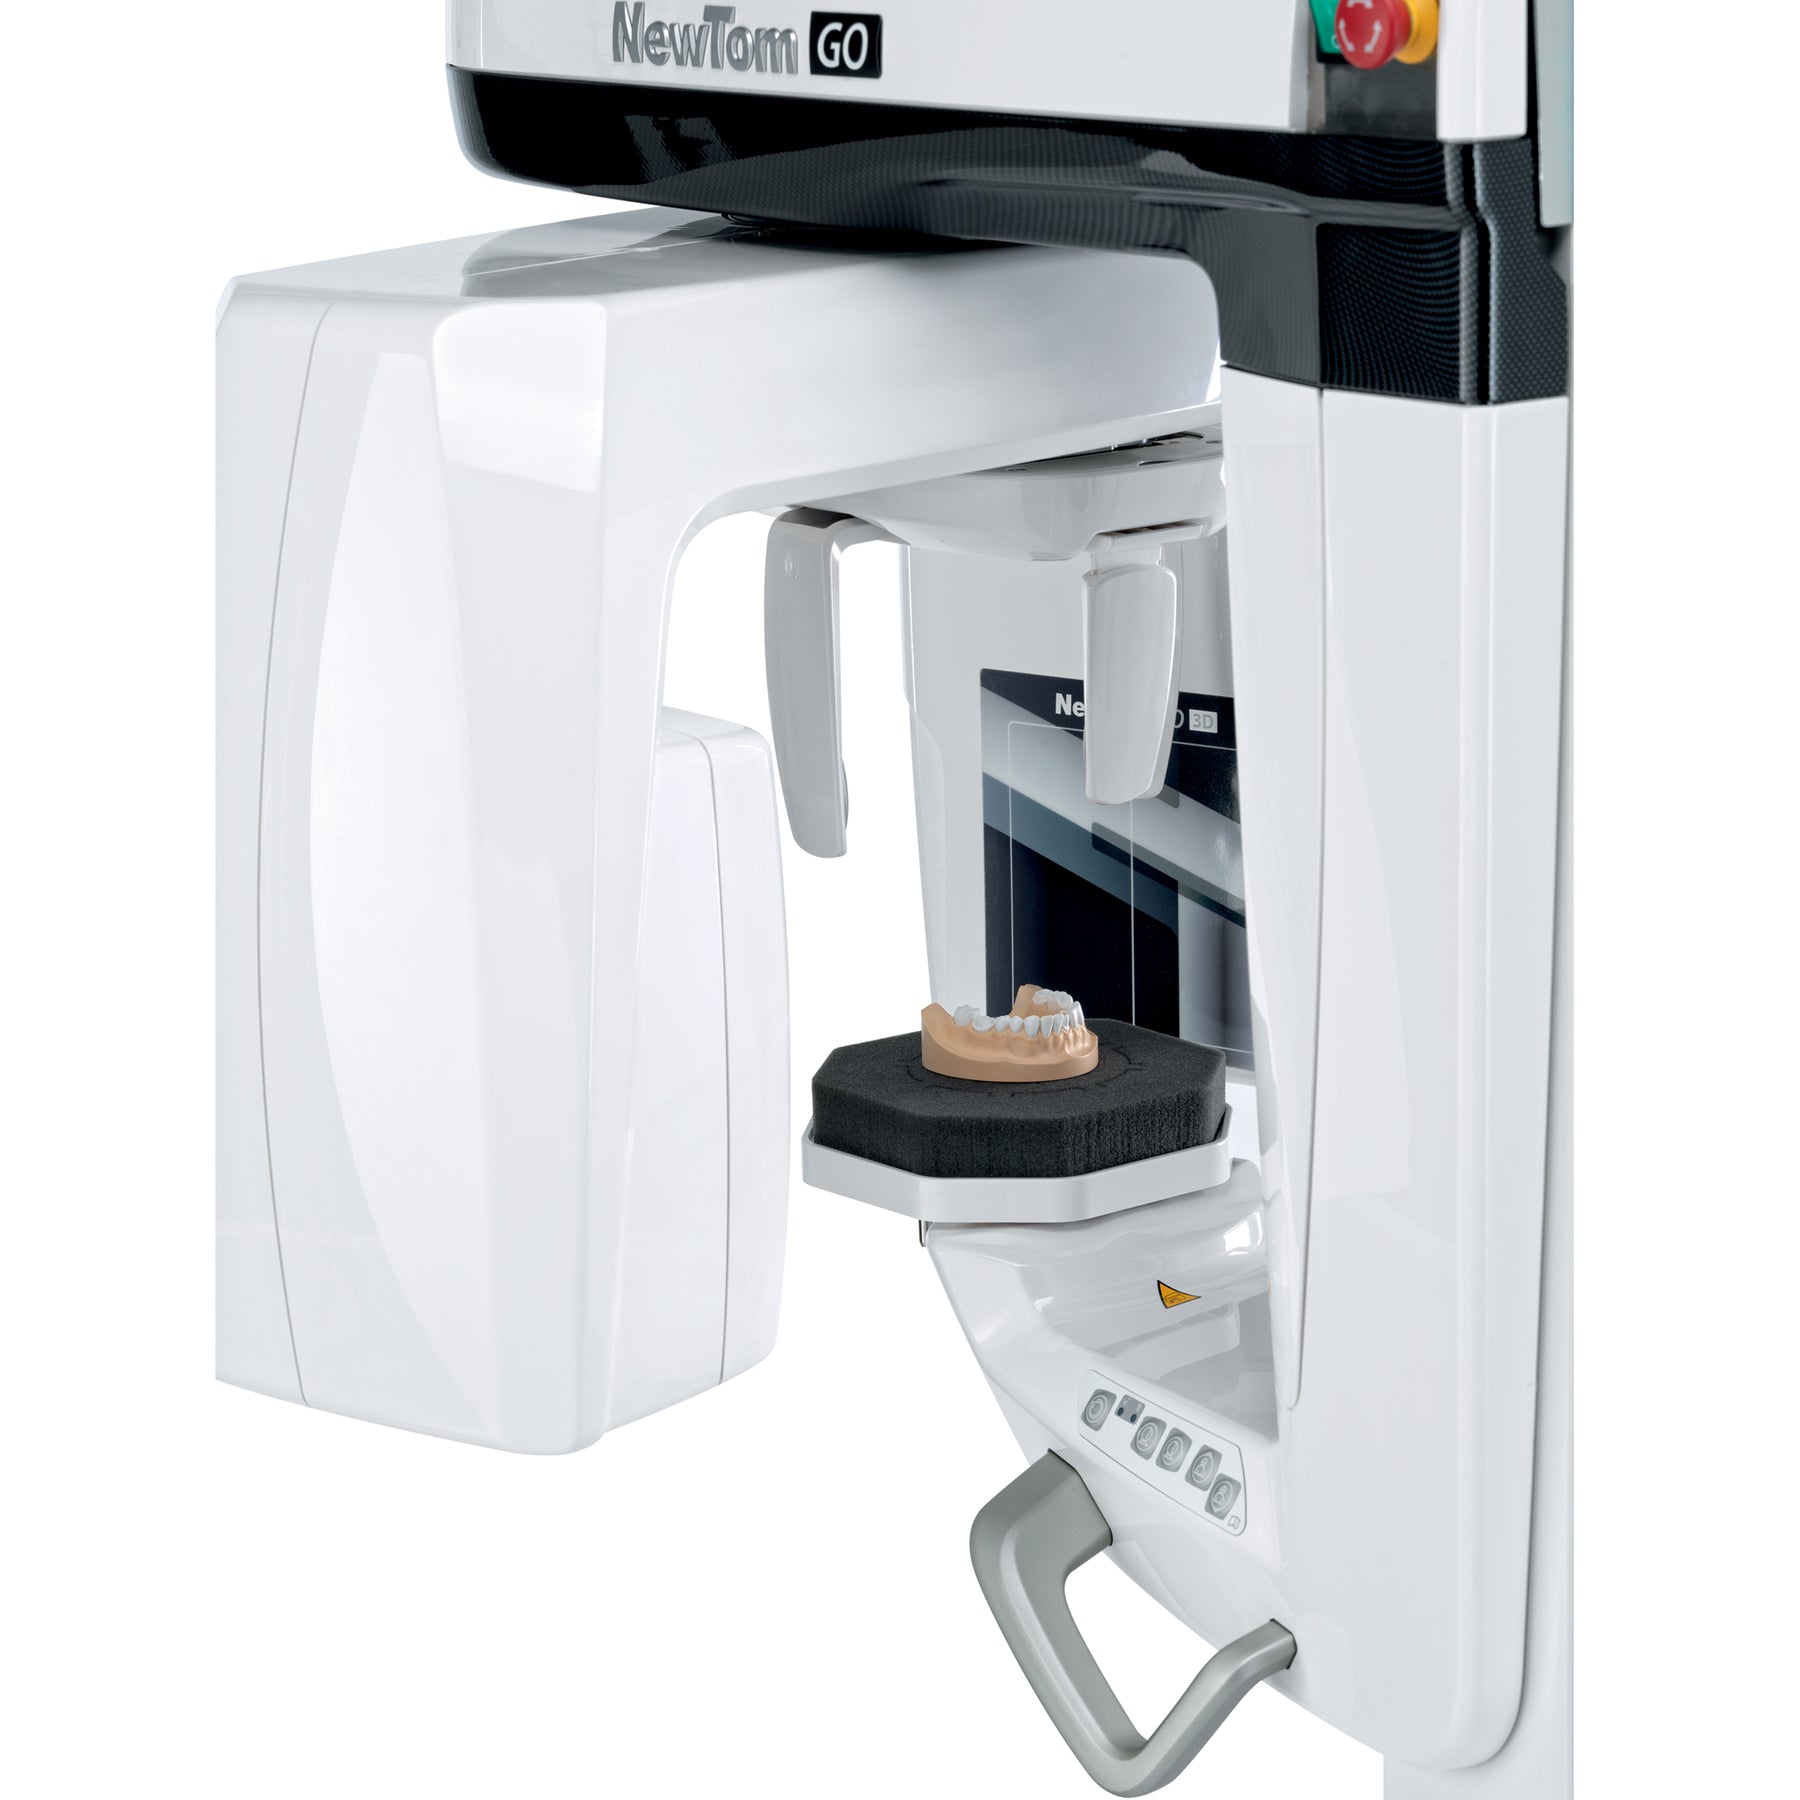 NewTom GO 2D/3D produces high quality images that meet a wide range of clinical diagnostic needs.